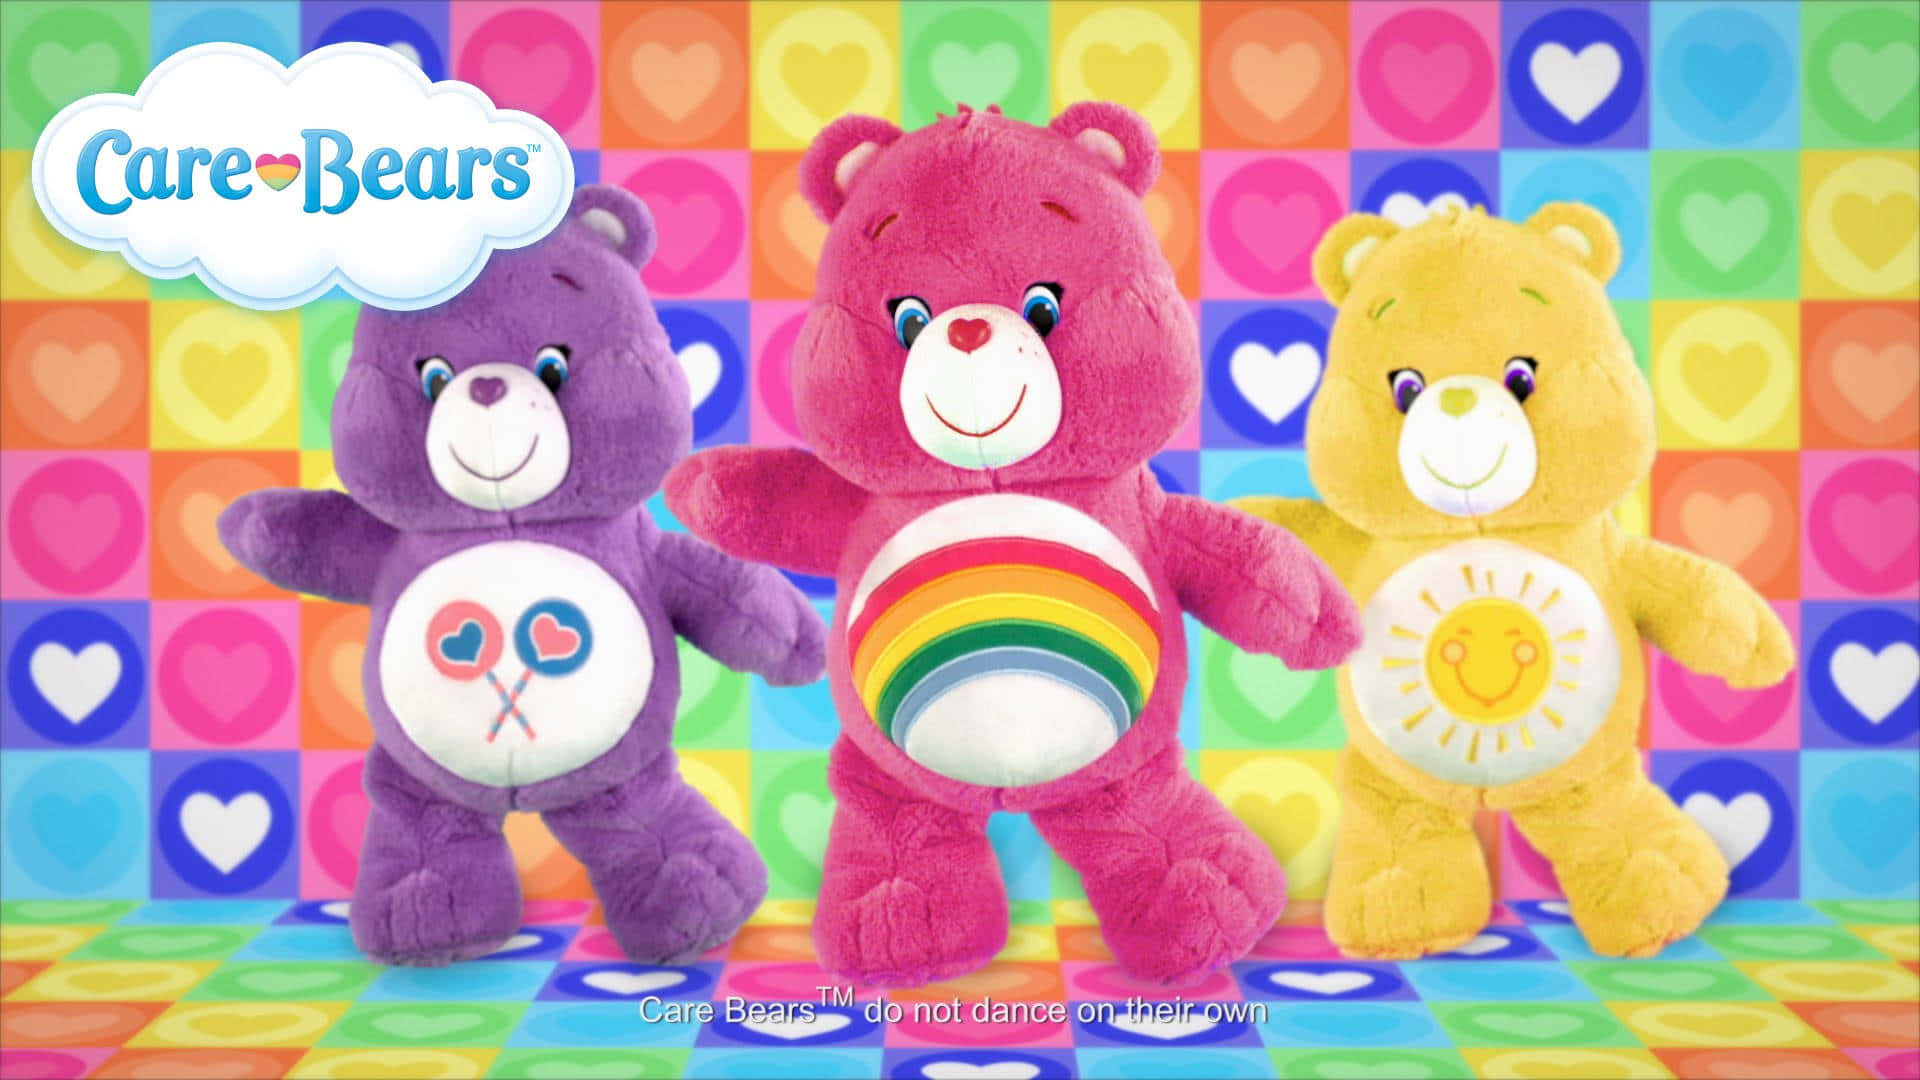 Celebrating joy and care with the Care Bear Family!